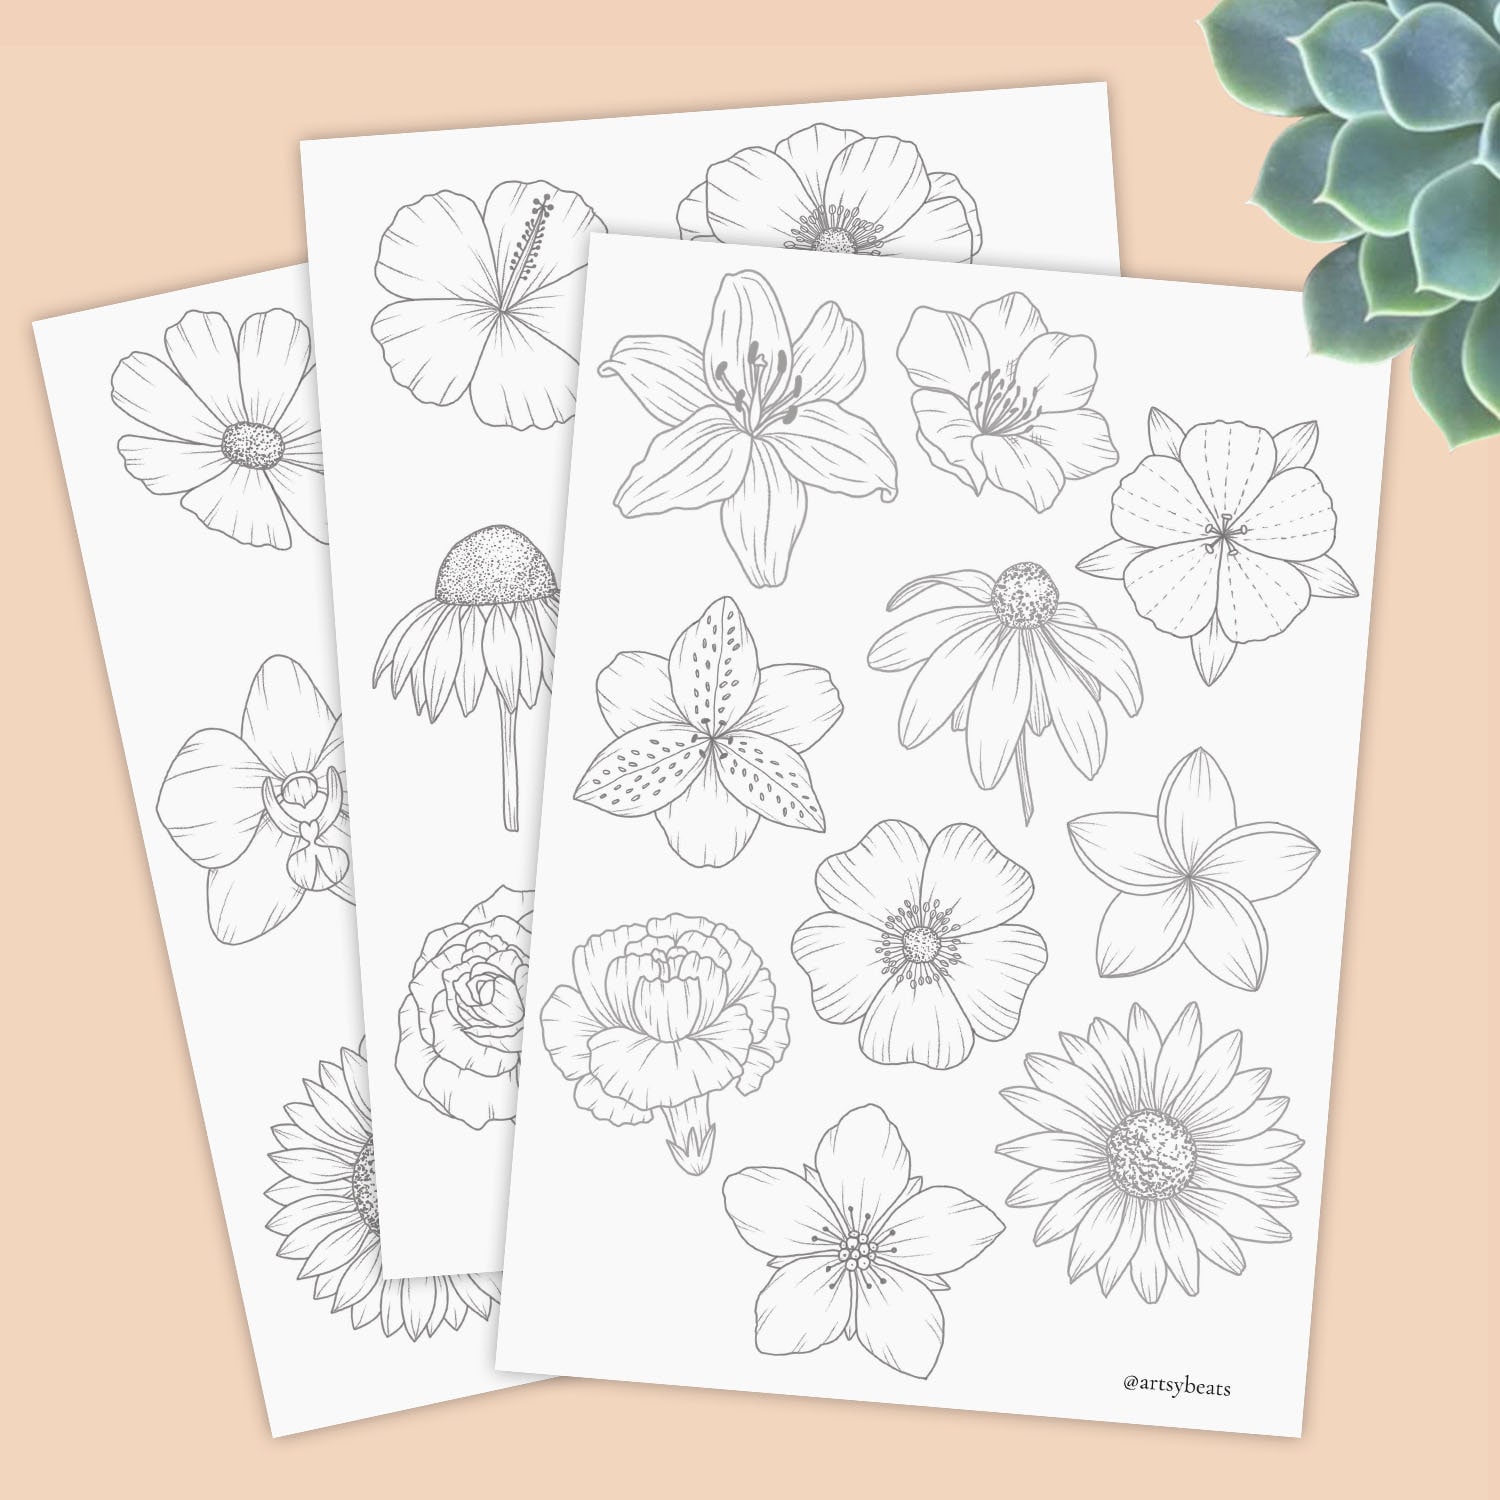 Learn to draw flowers tracing guides coloring pages printable worksheet digital download hibiscus rose daffodil anemone and more download now